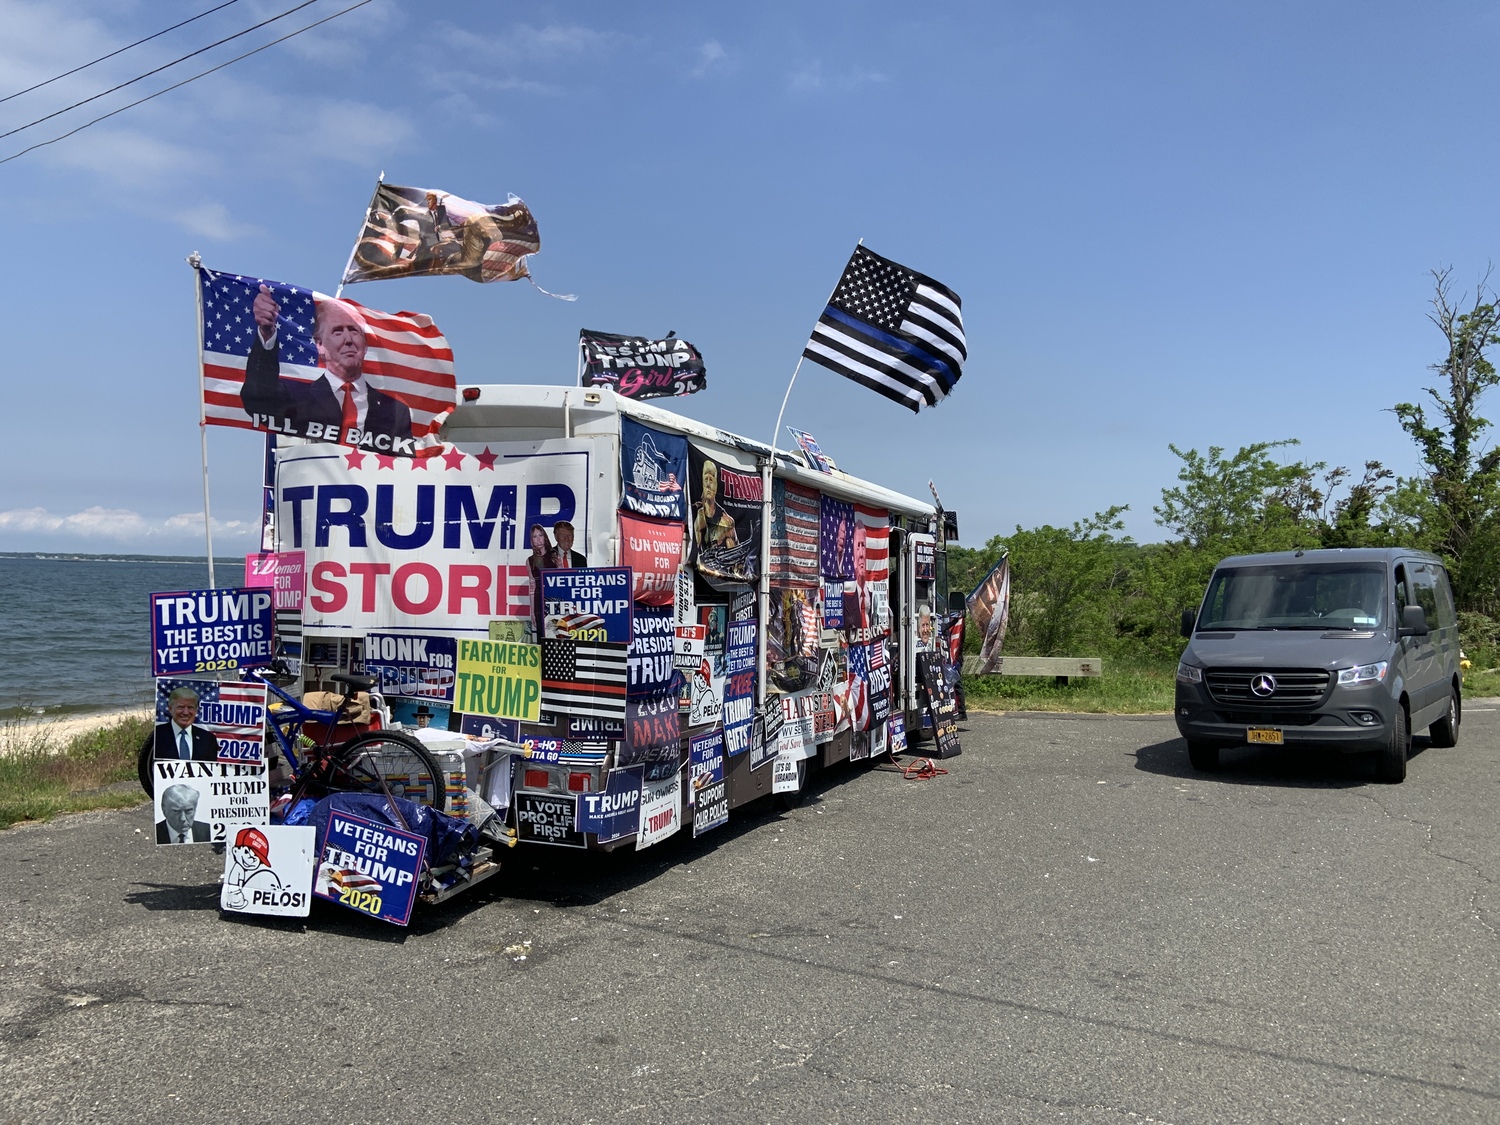 An RV festooned with Donald Trump signs and flags and laden with pro-Trump merchandise inside was stranded on the side of Long Beach Road in Noyac on Tuesday. STEPHEN J. KOTZ